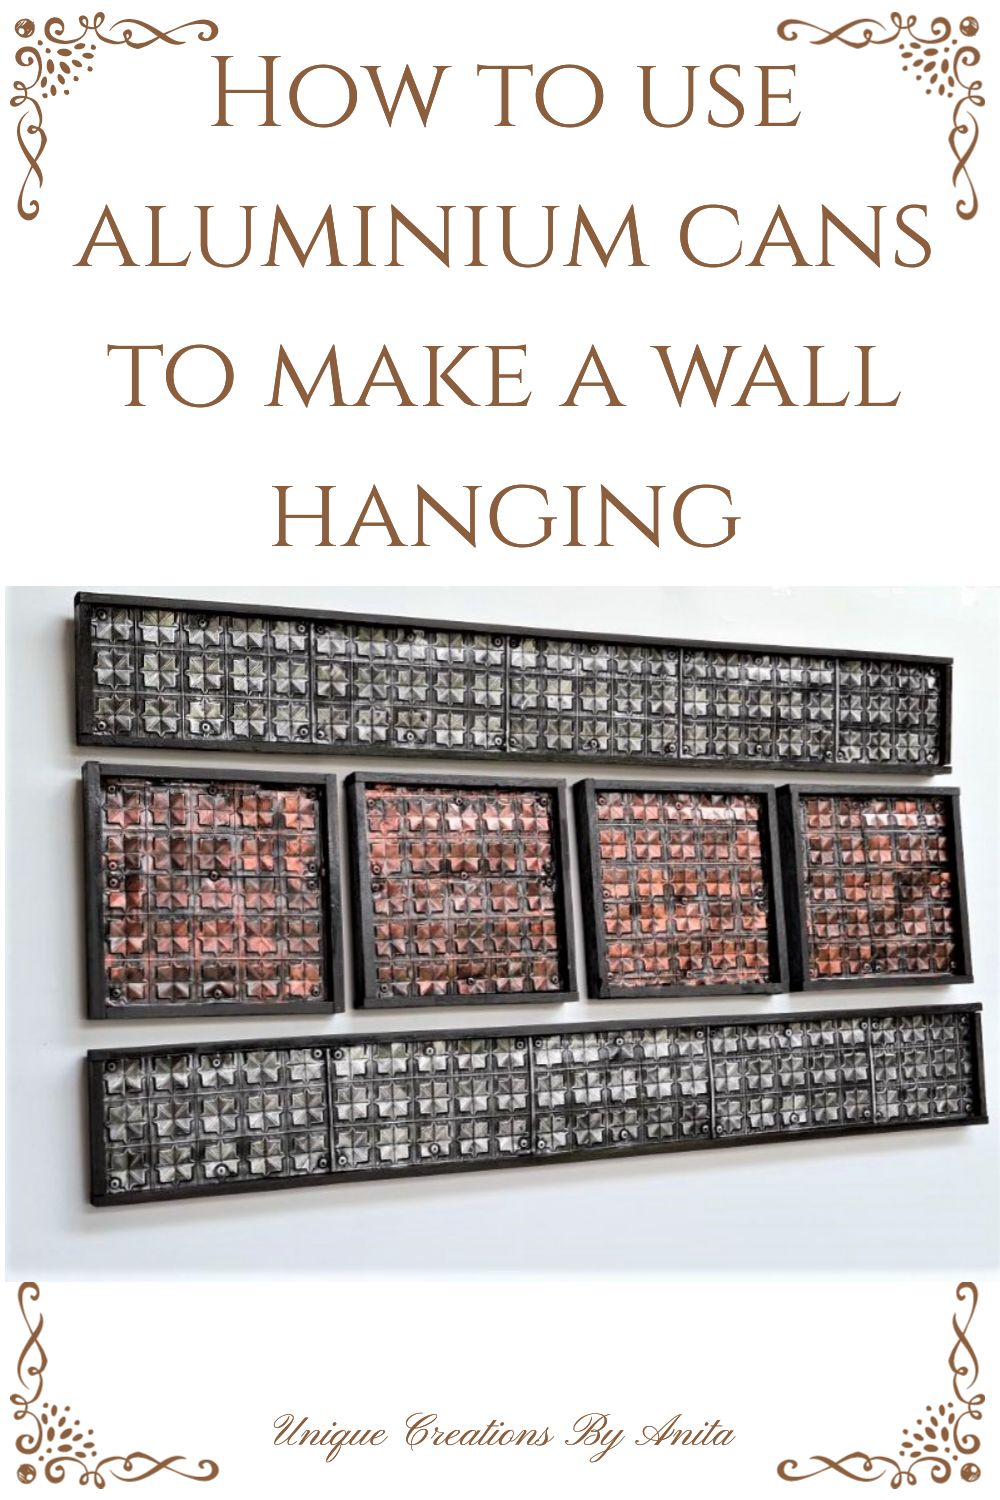 Recycled aluminium cans made into textured wall hanging.